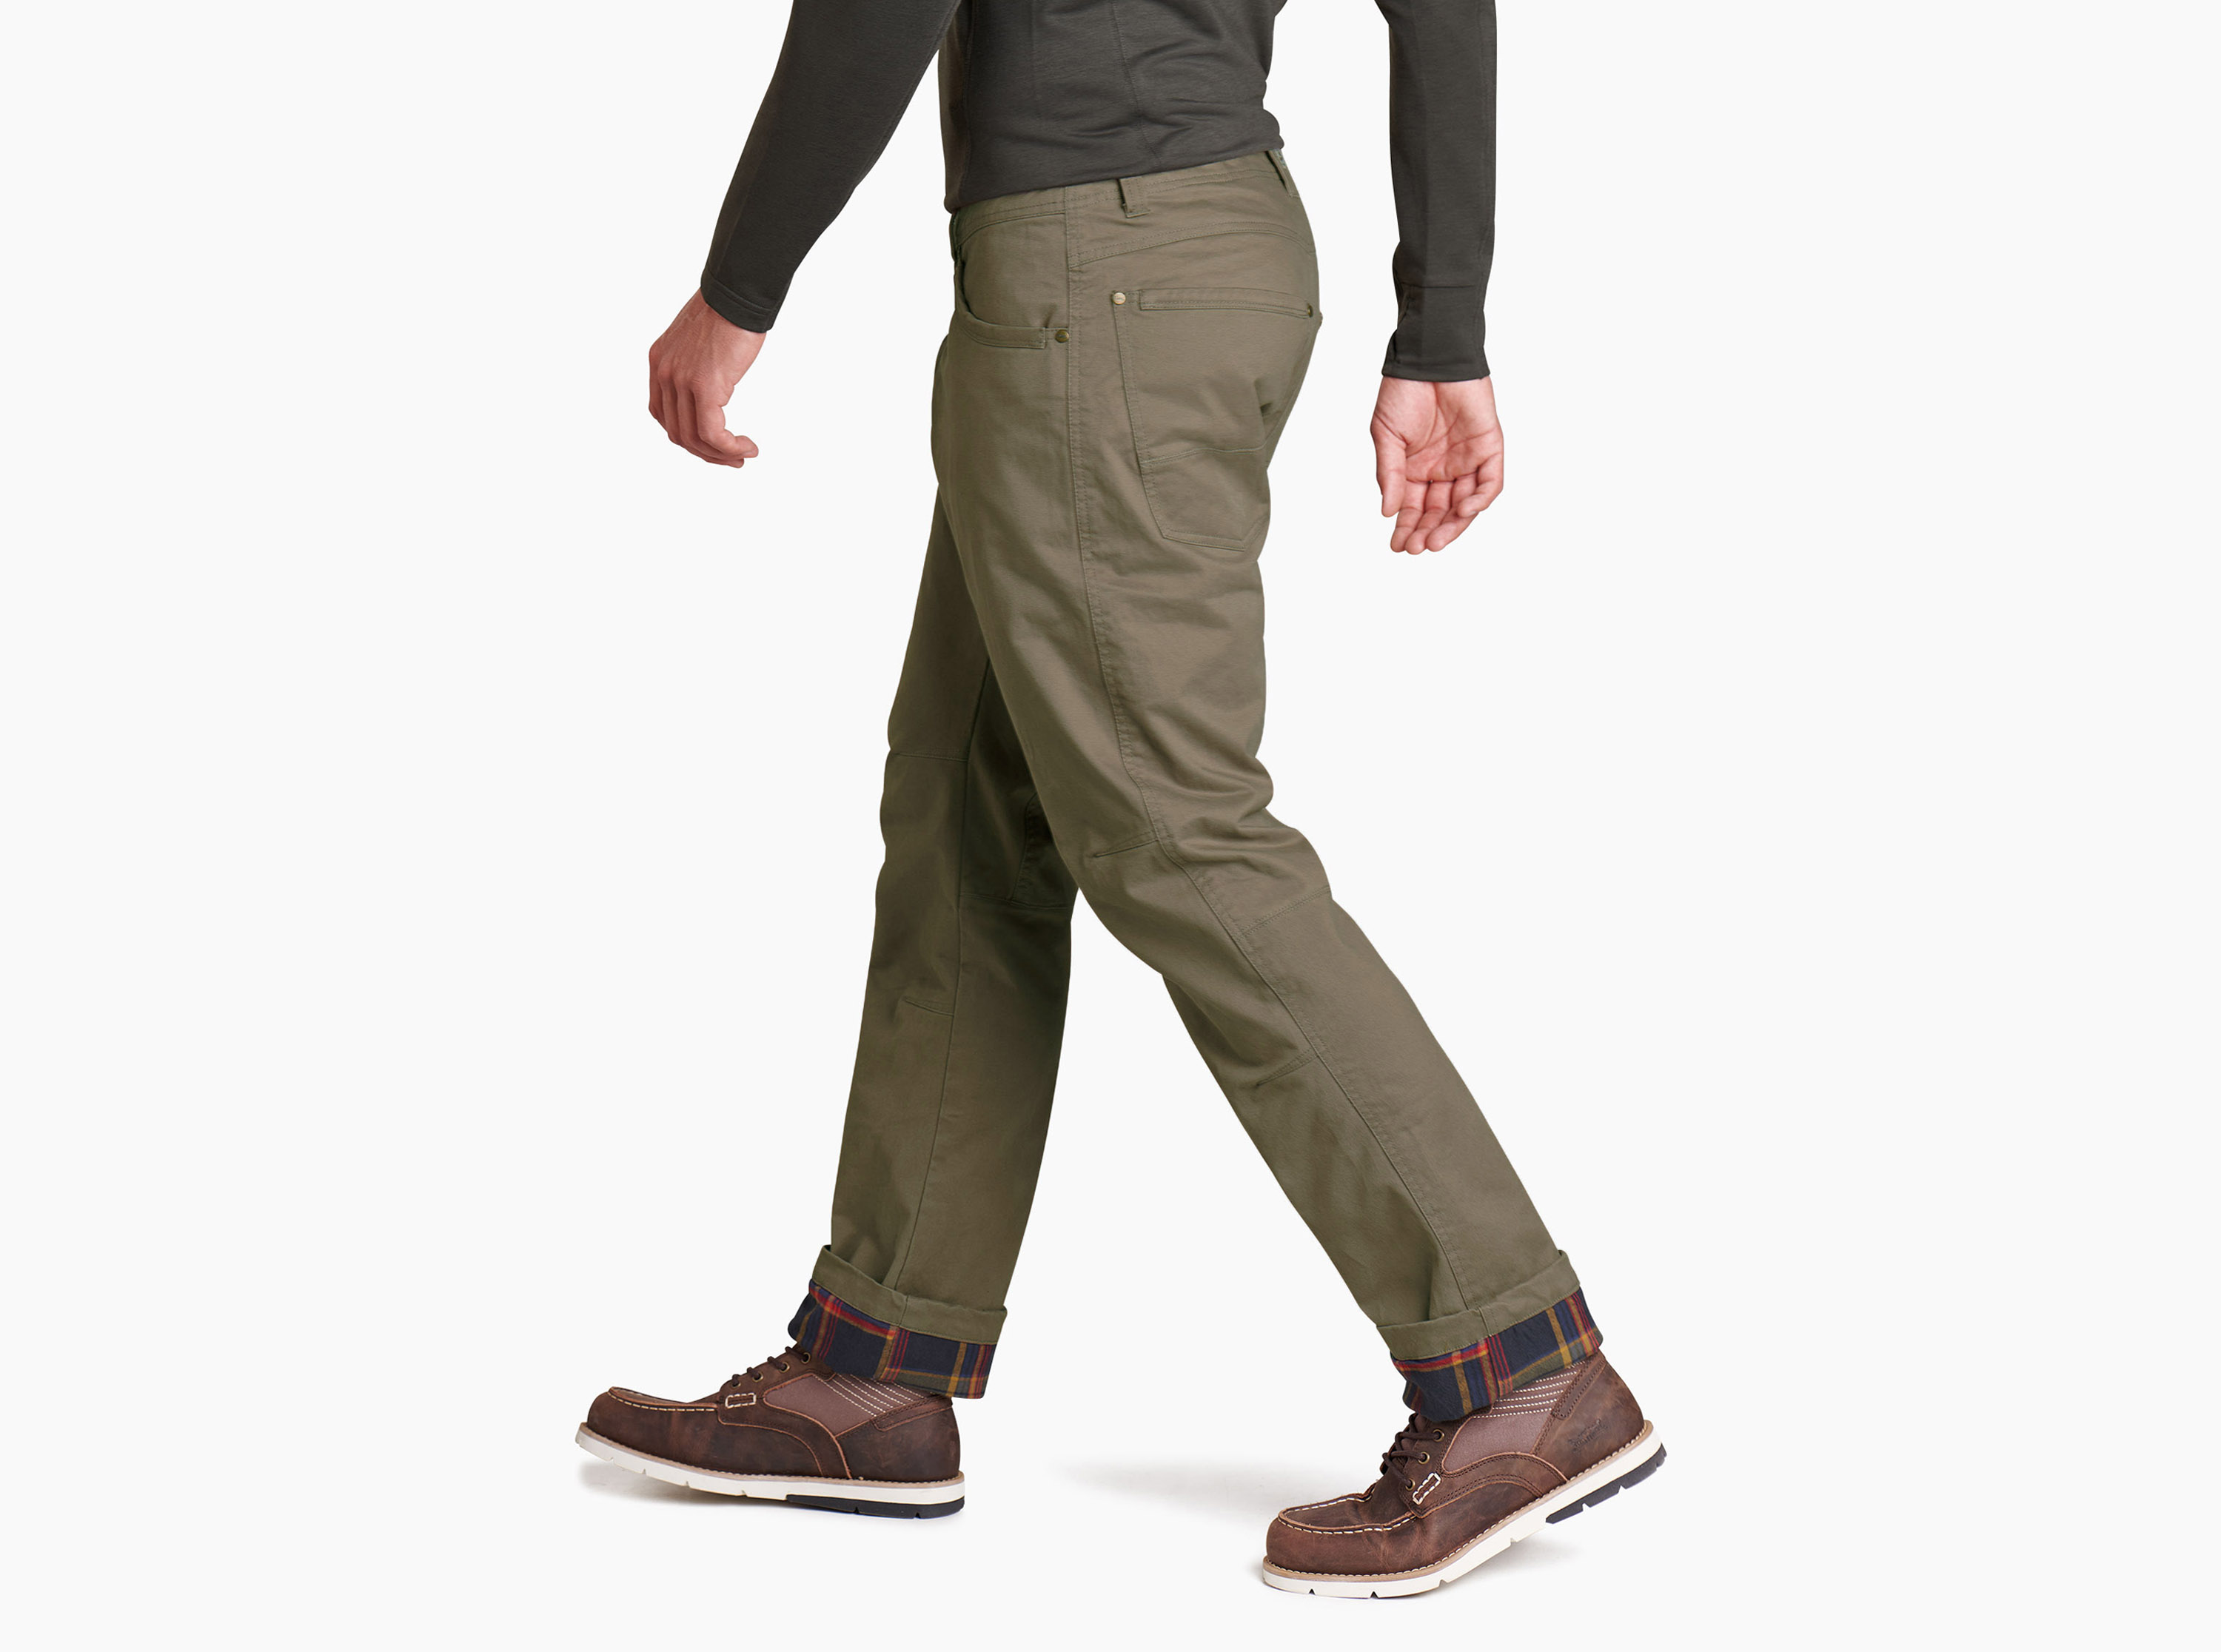 Kuhl menswear review: Aktivator Jacket, Rydr Pants, and more